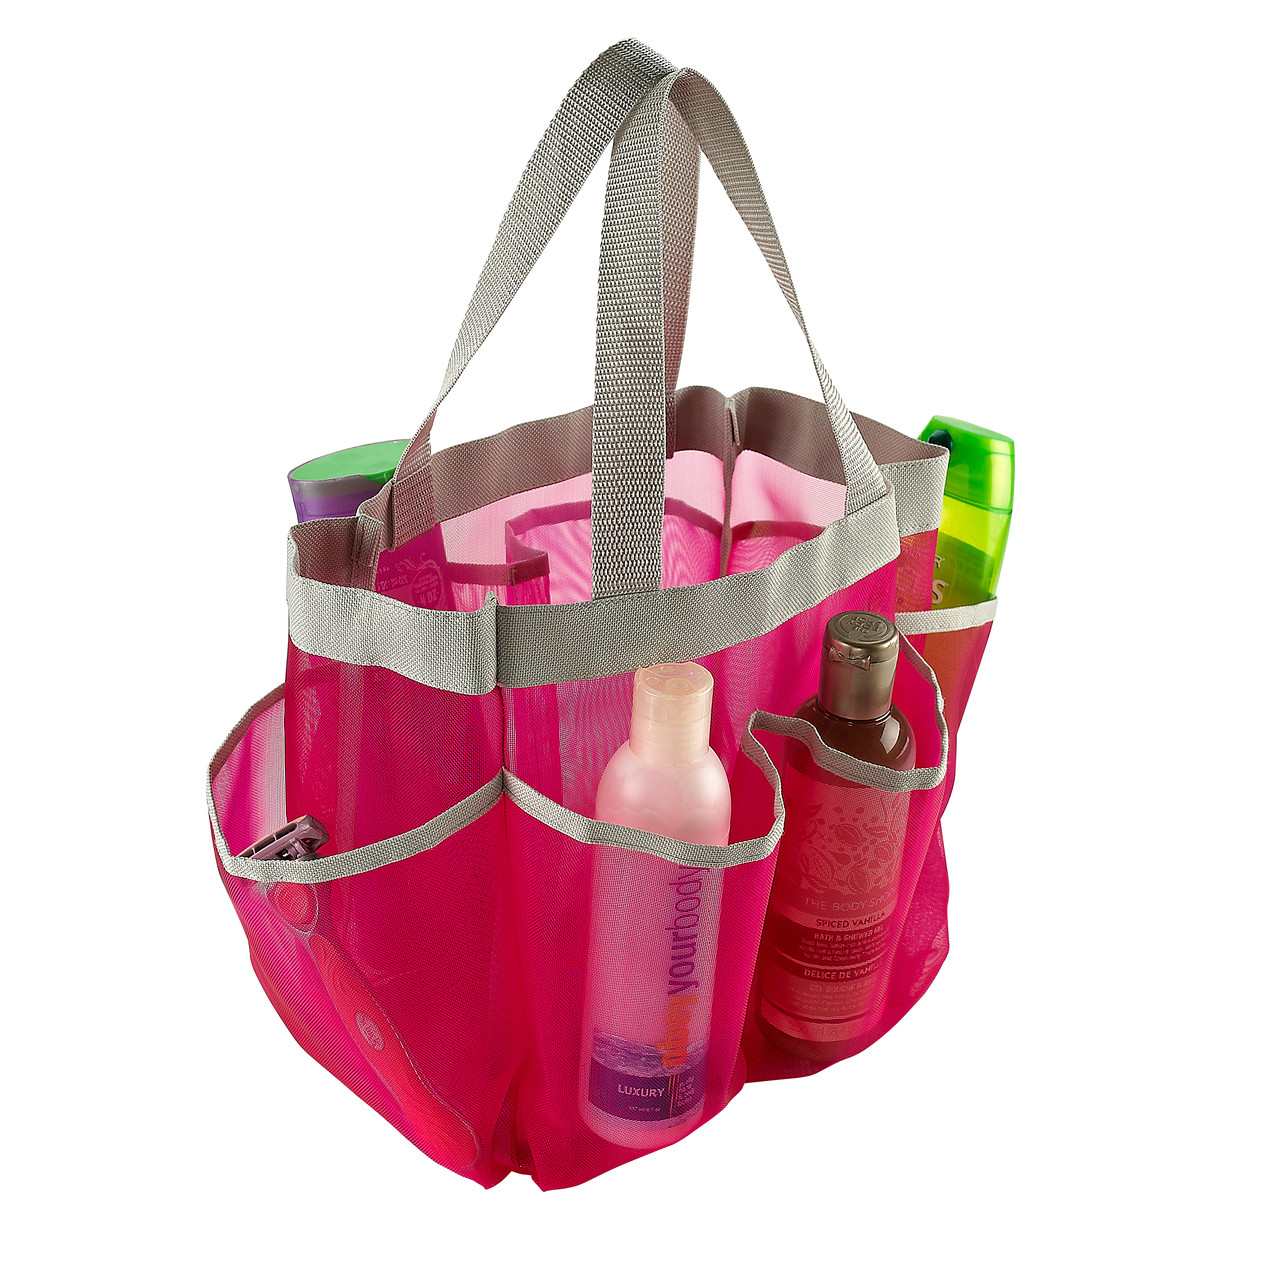 Hanging shower caddy - With large mesh pockets